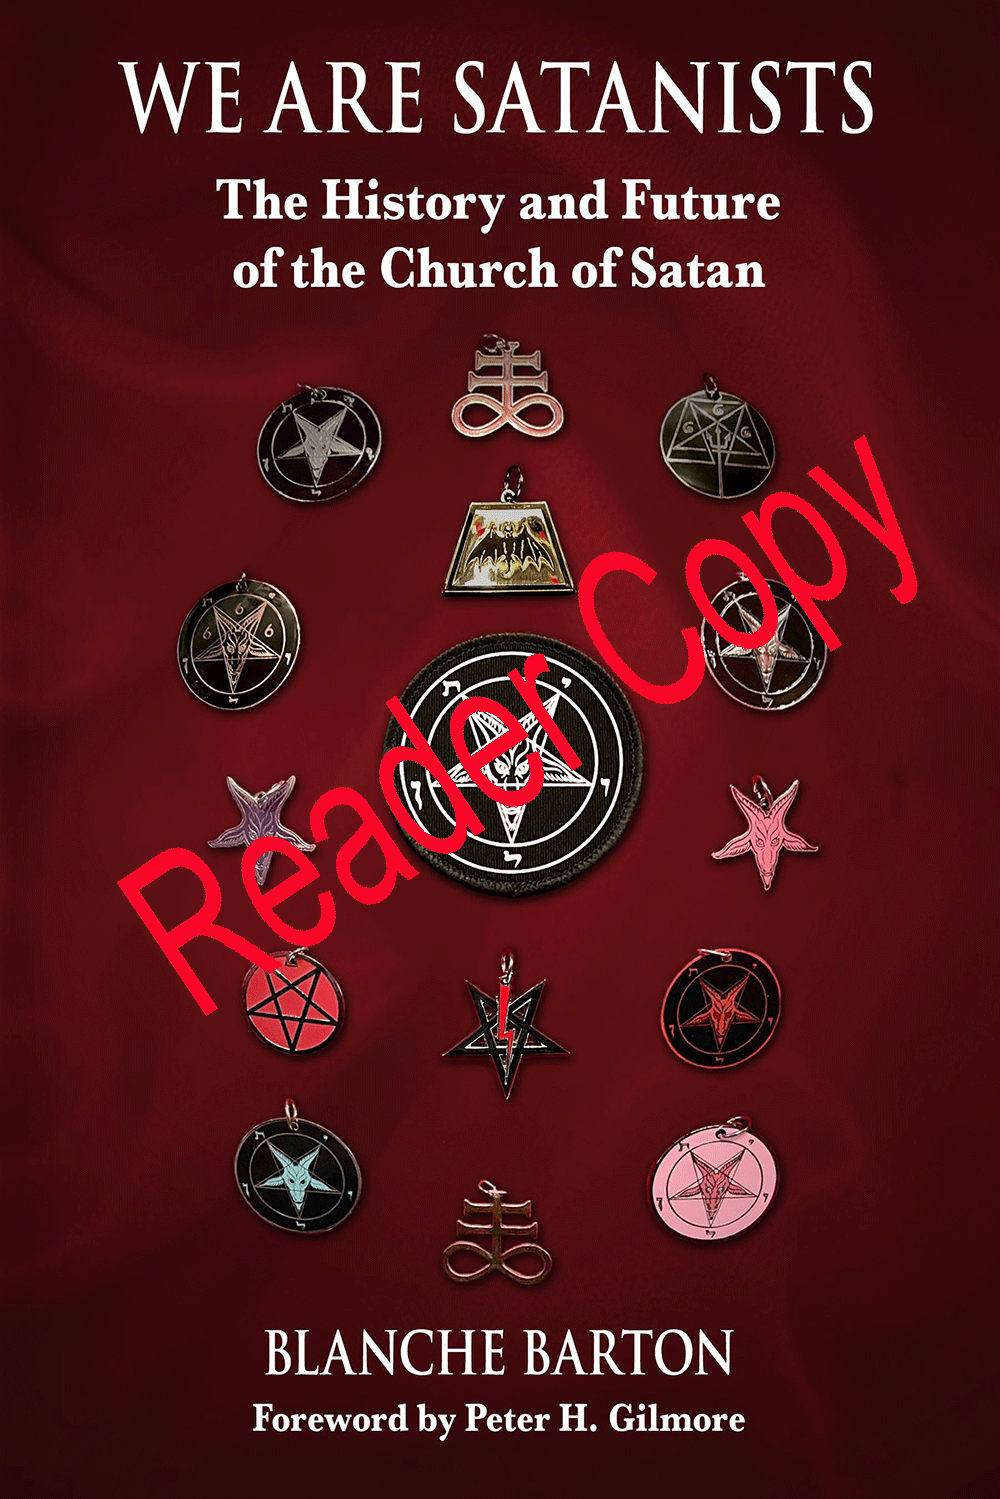 WE ARE SATANISTS by Blanche Barton (Reader Copy)